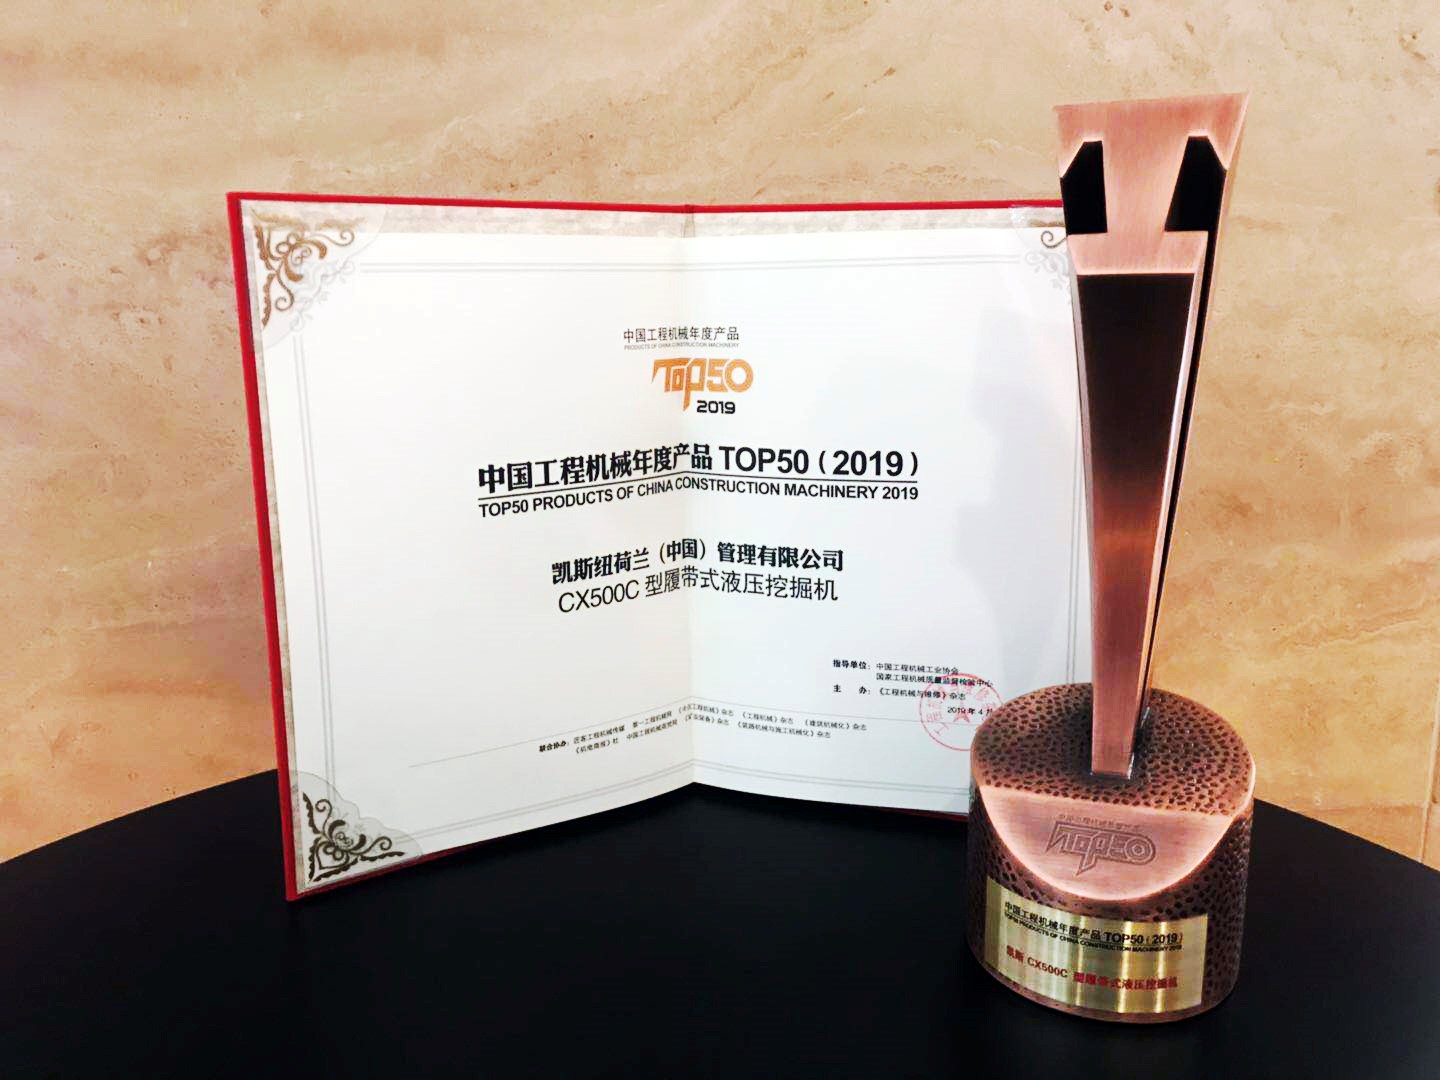 CASE 500C- Mass wins “The King of Mines” in TOP50 Awards